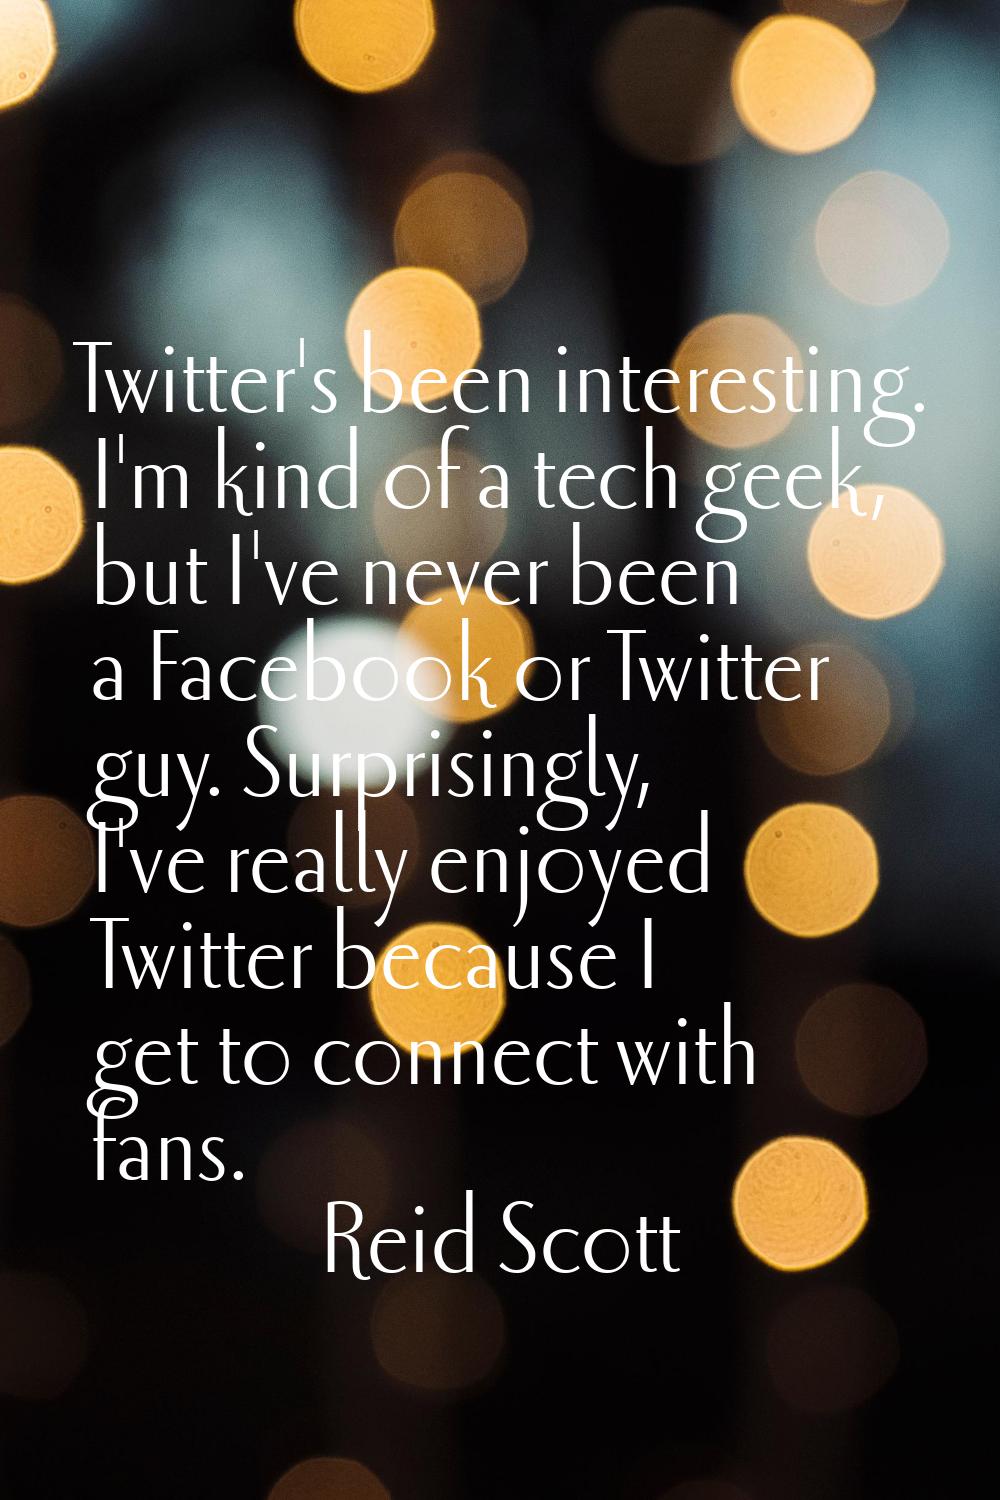 Twitter's been interesting. I'm kind of a tech geek, but I've never been a Facebook or Twitter guy.